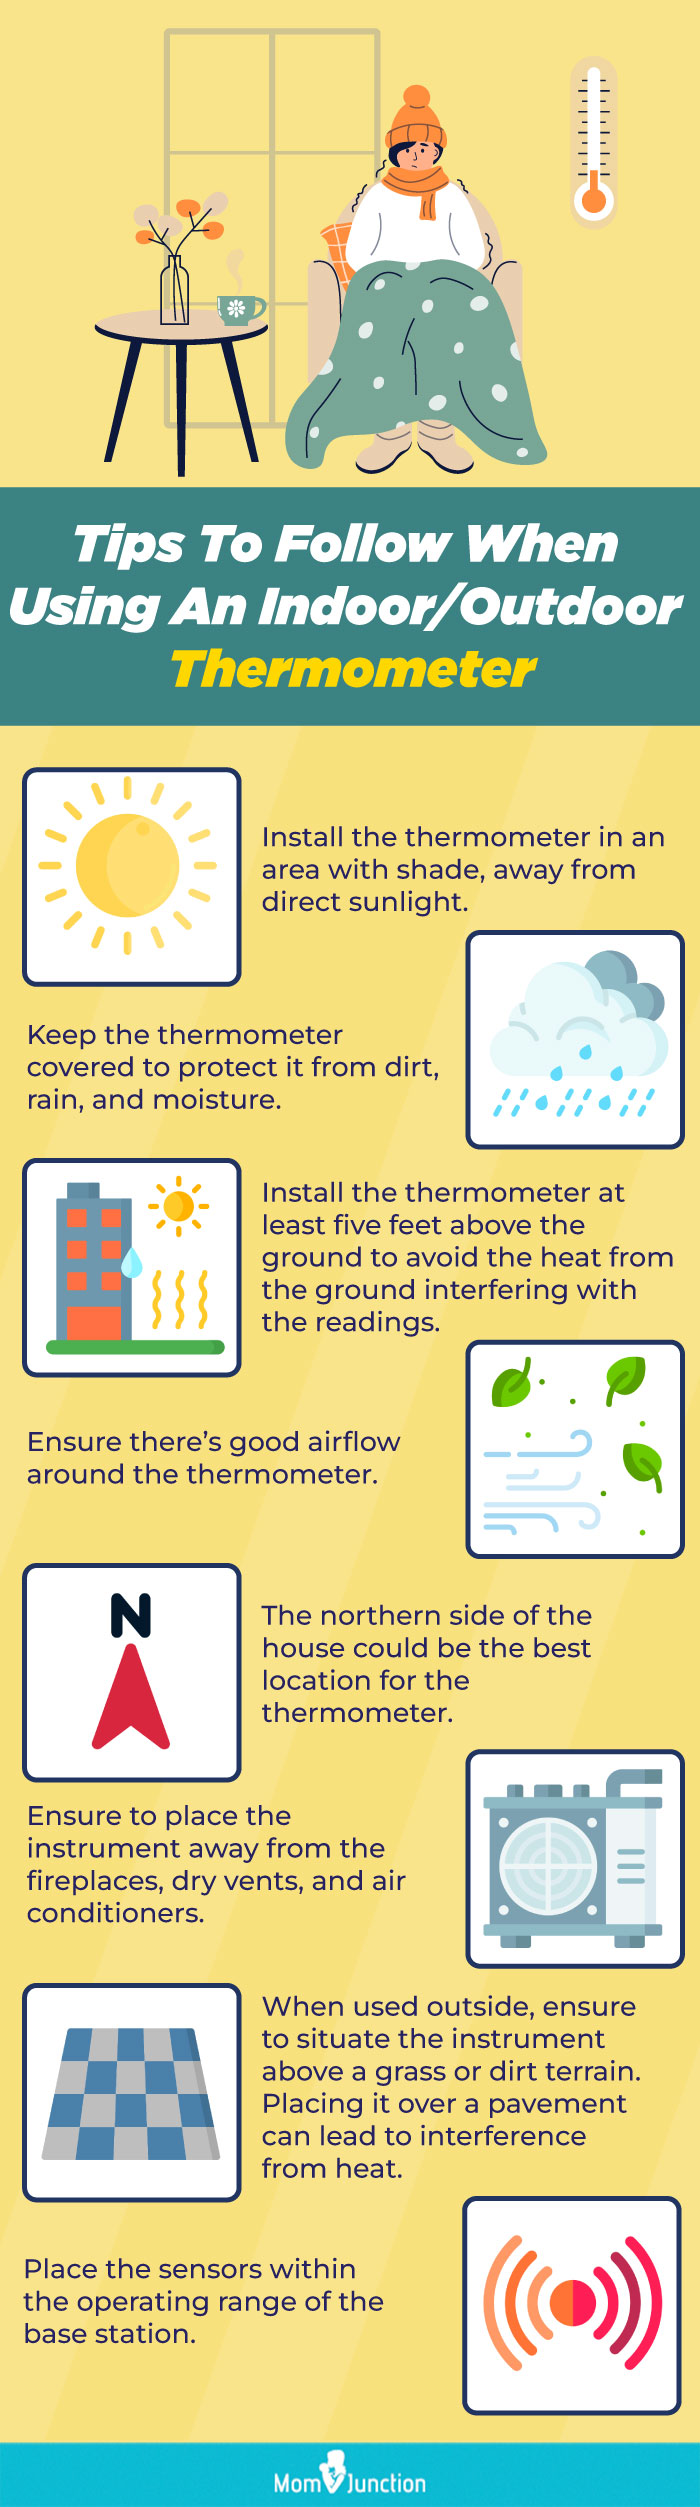 Tips To Follow When Using An Indoor Outdoor Thermometer